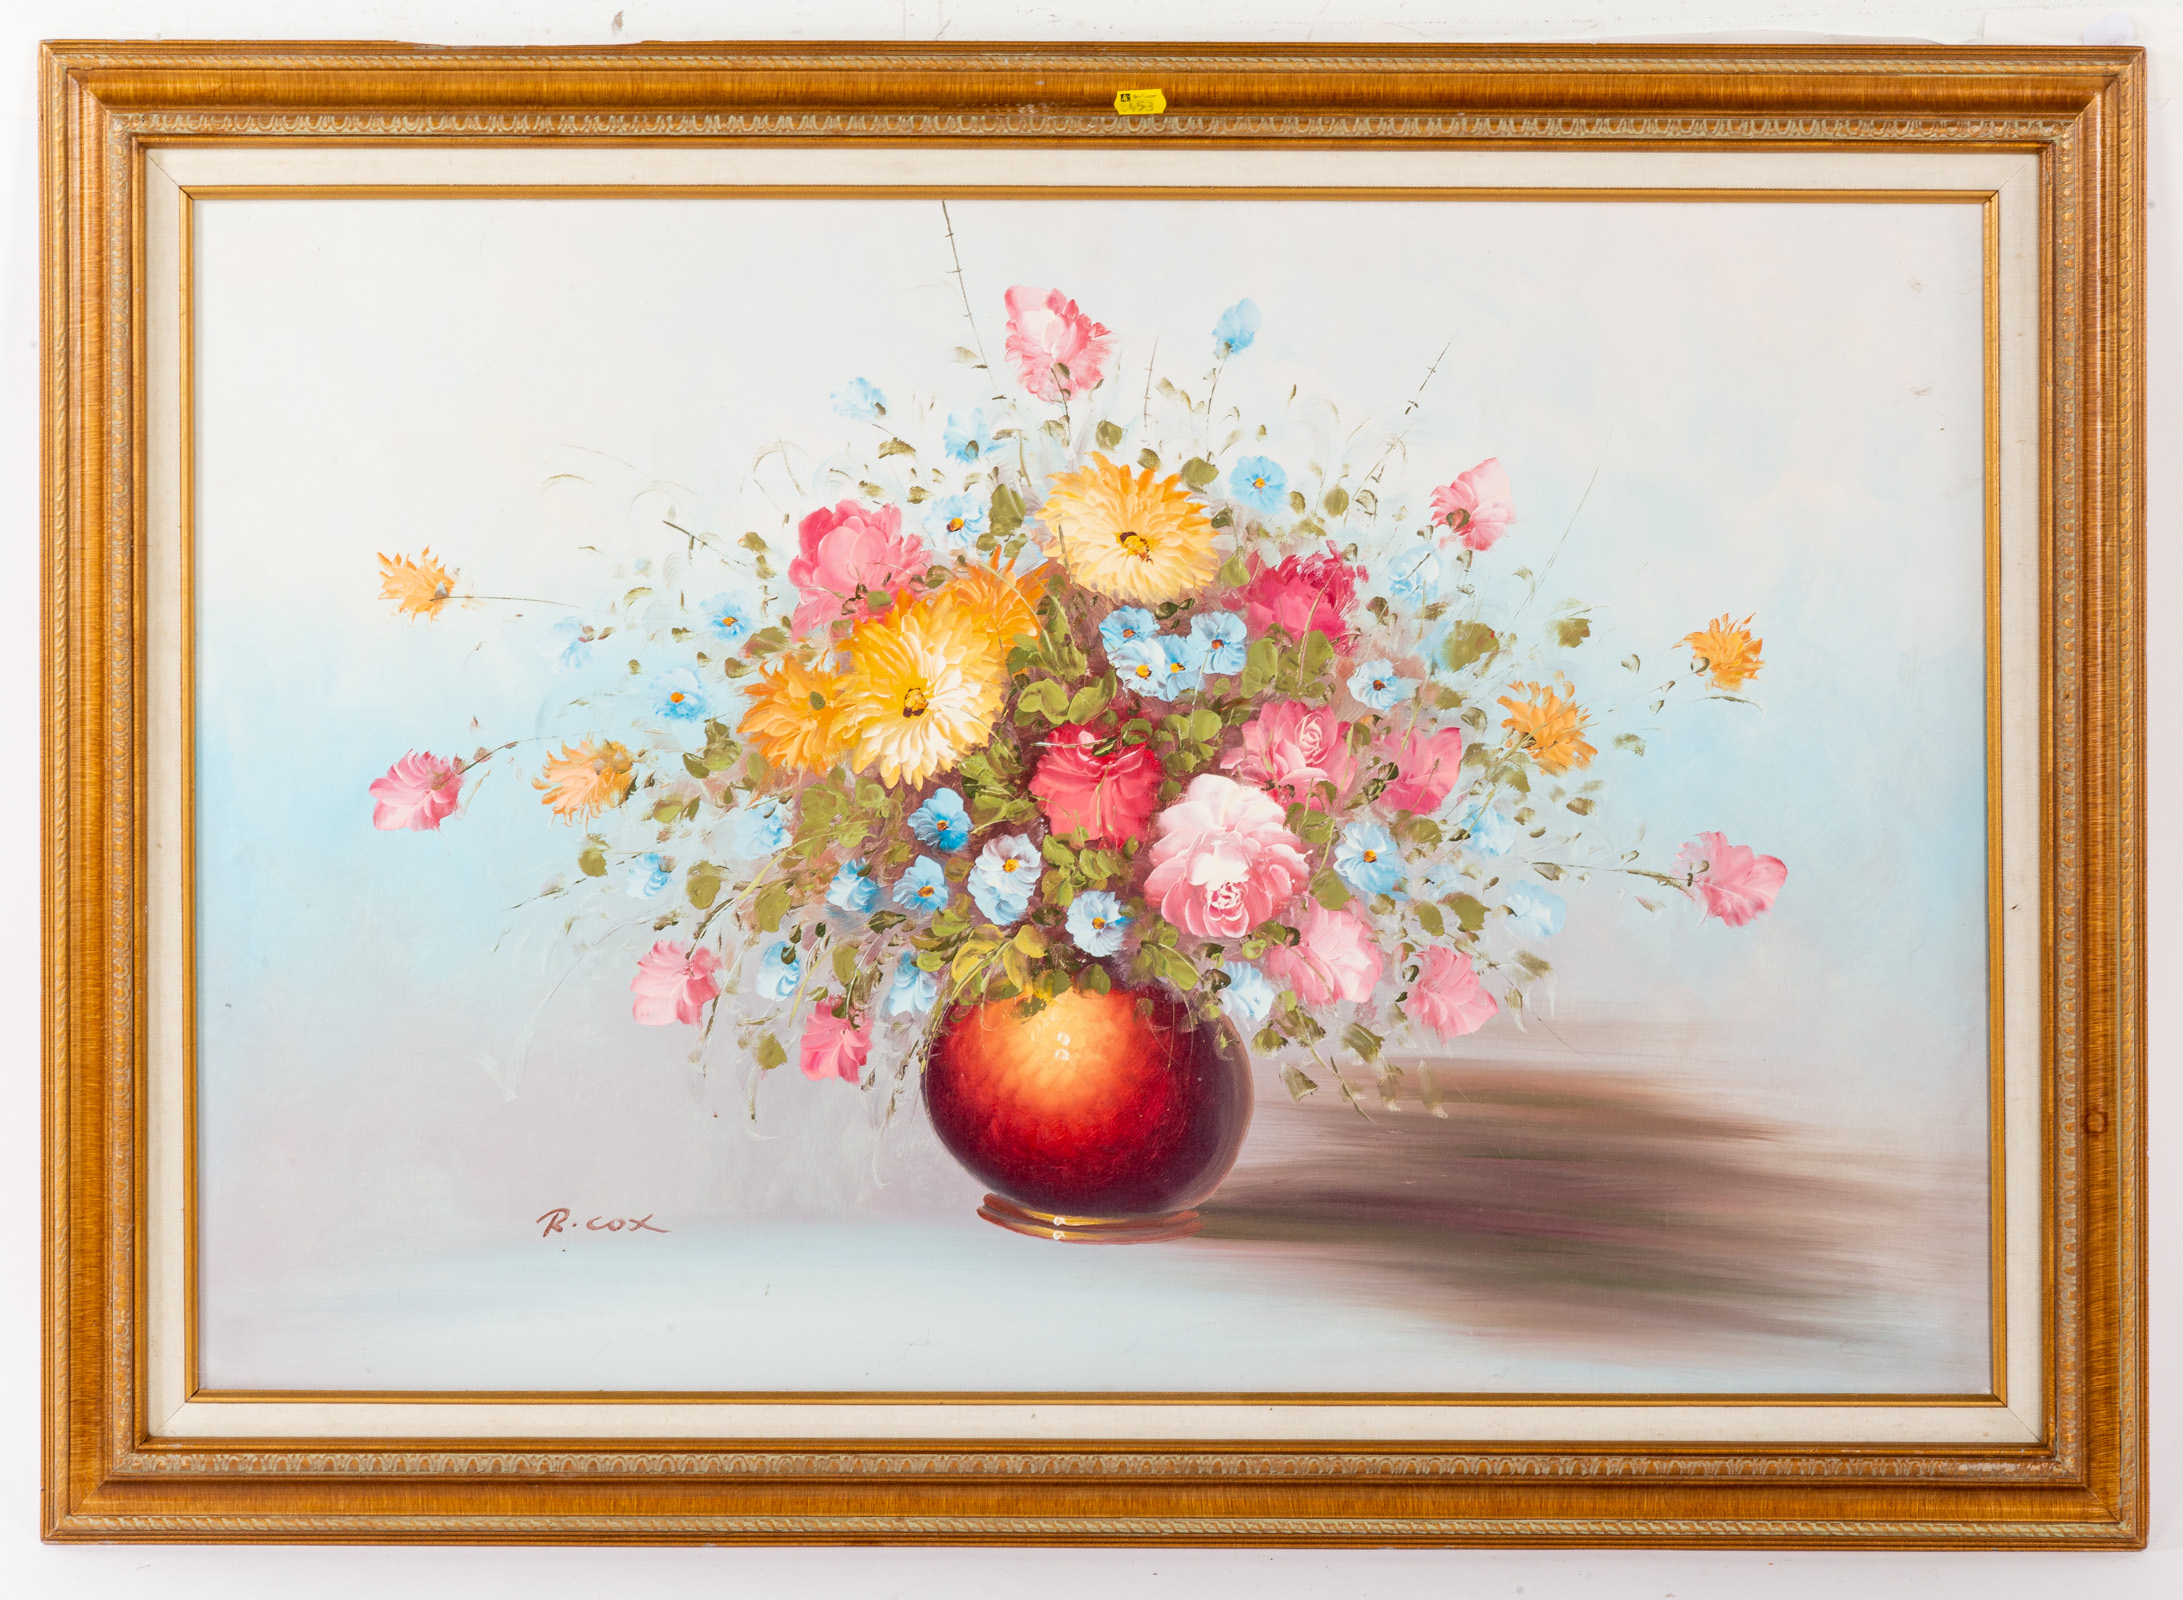 R COX STILL LIFE WITH FLOWERS  28865e